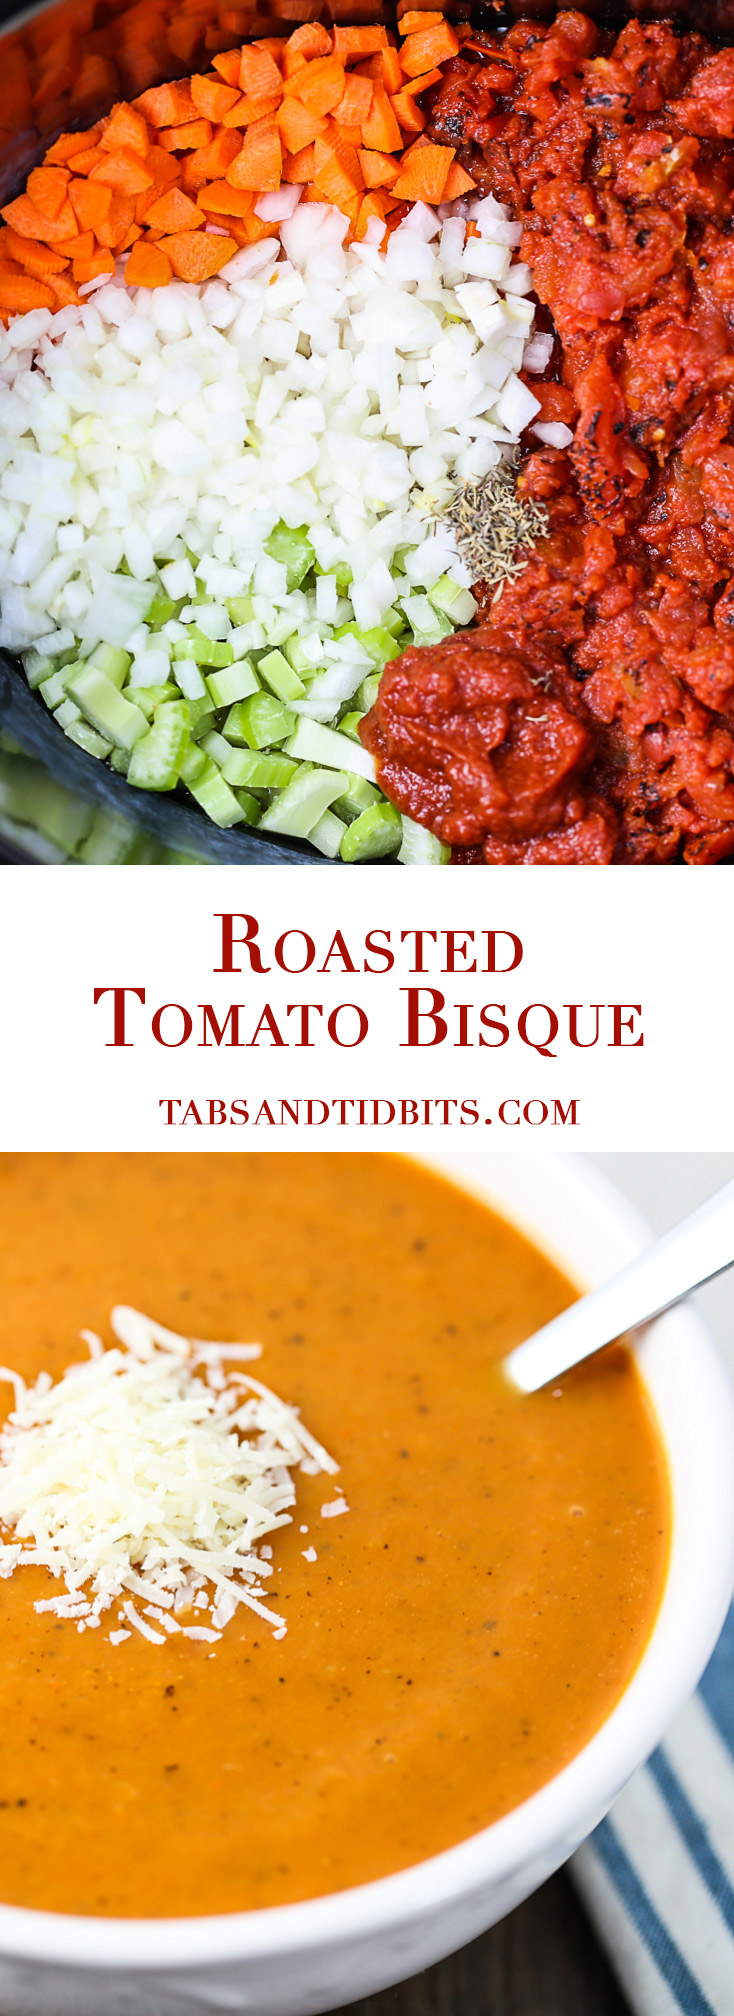 Slow Cooker Roasted Tomato Bisque - A creamy, smooth, and velvety tomato bisque full of classic veggies and fire-roasted tomatoes! 